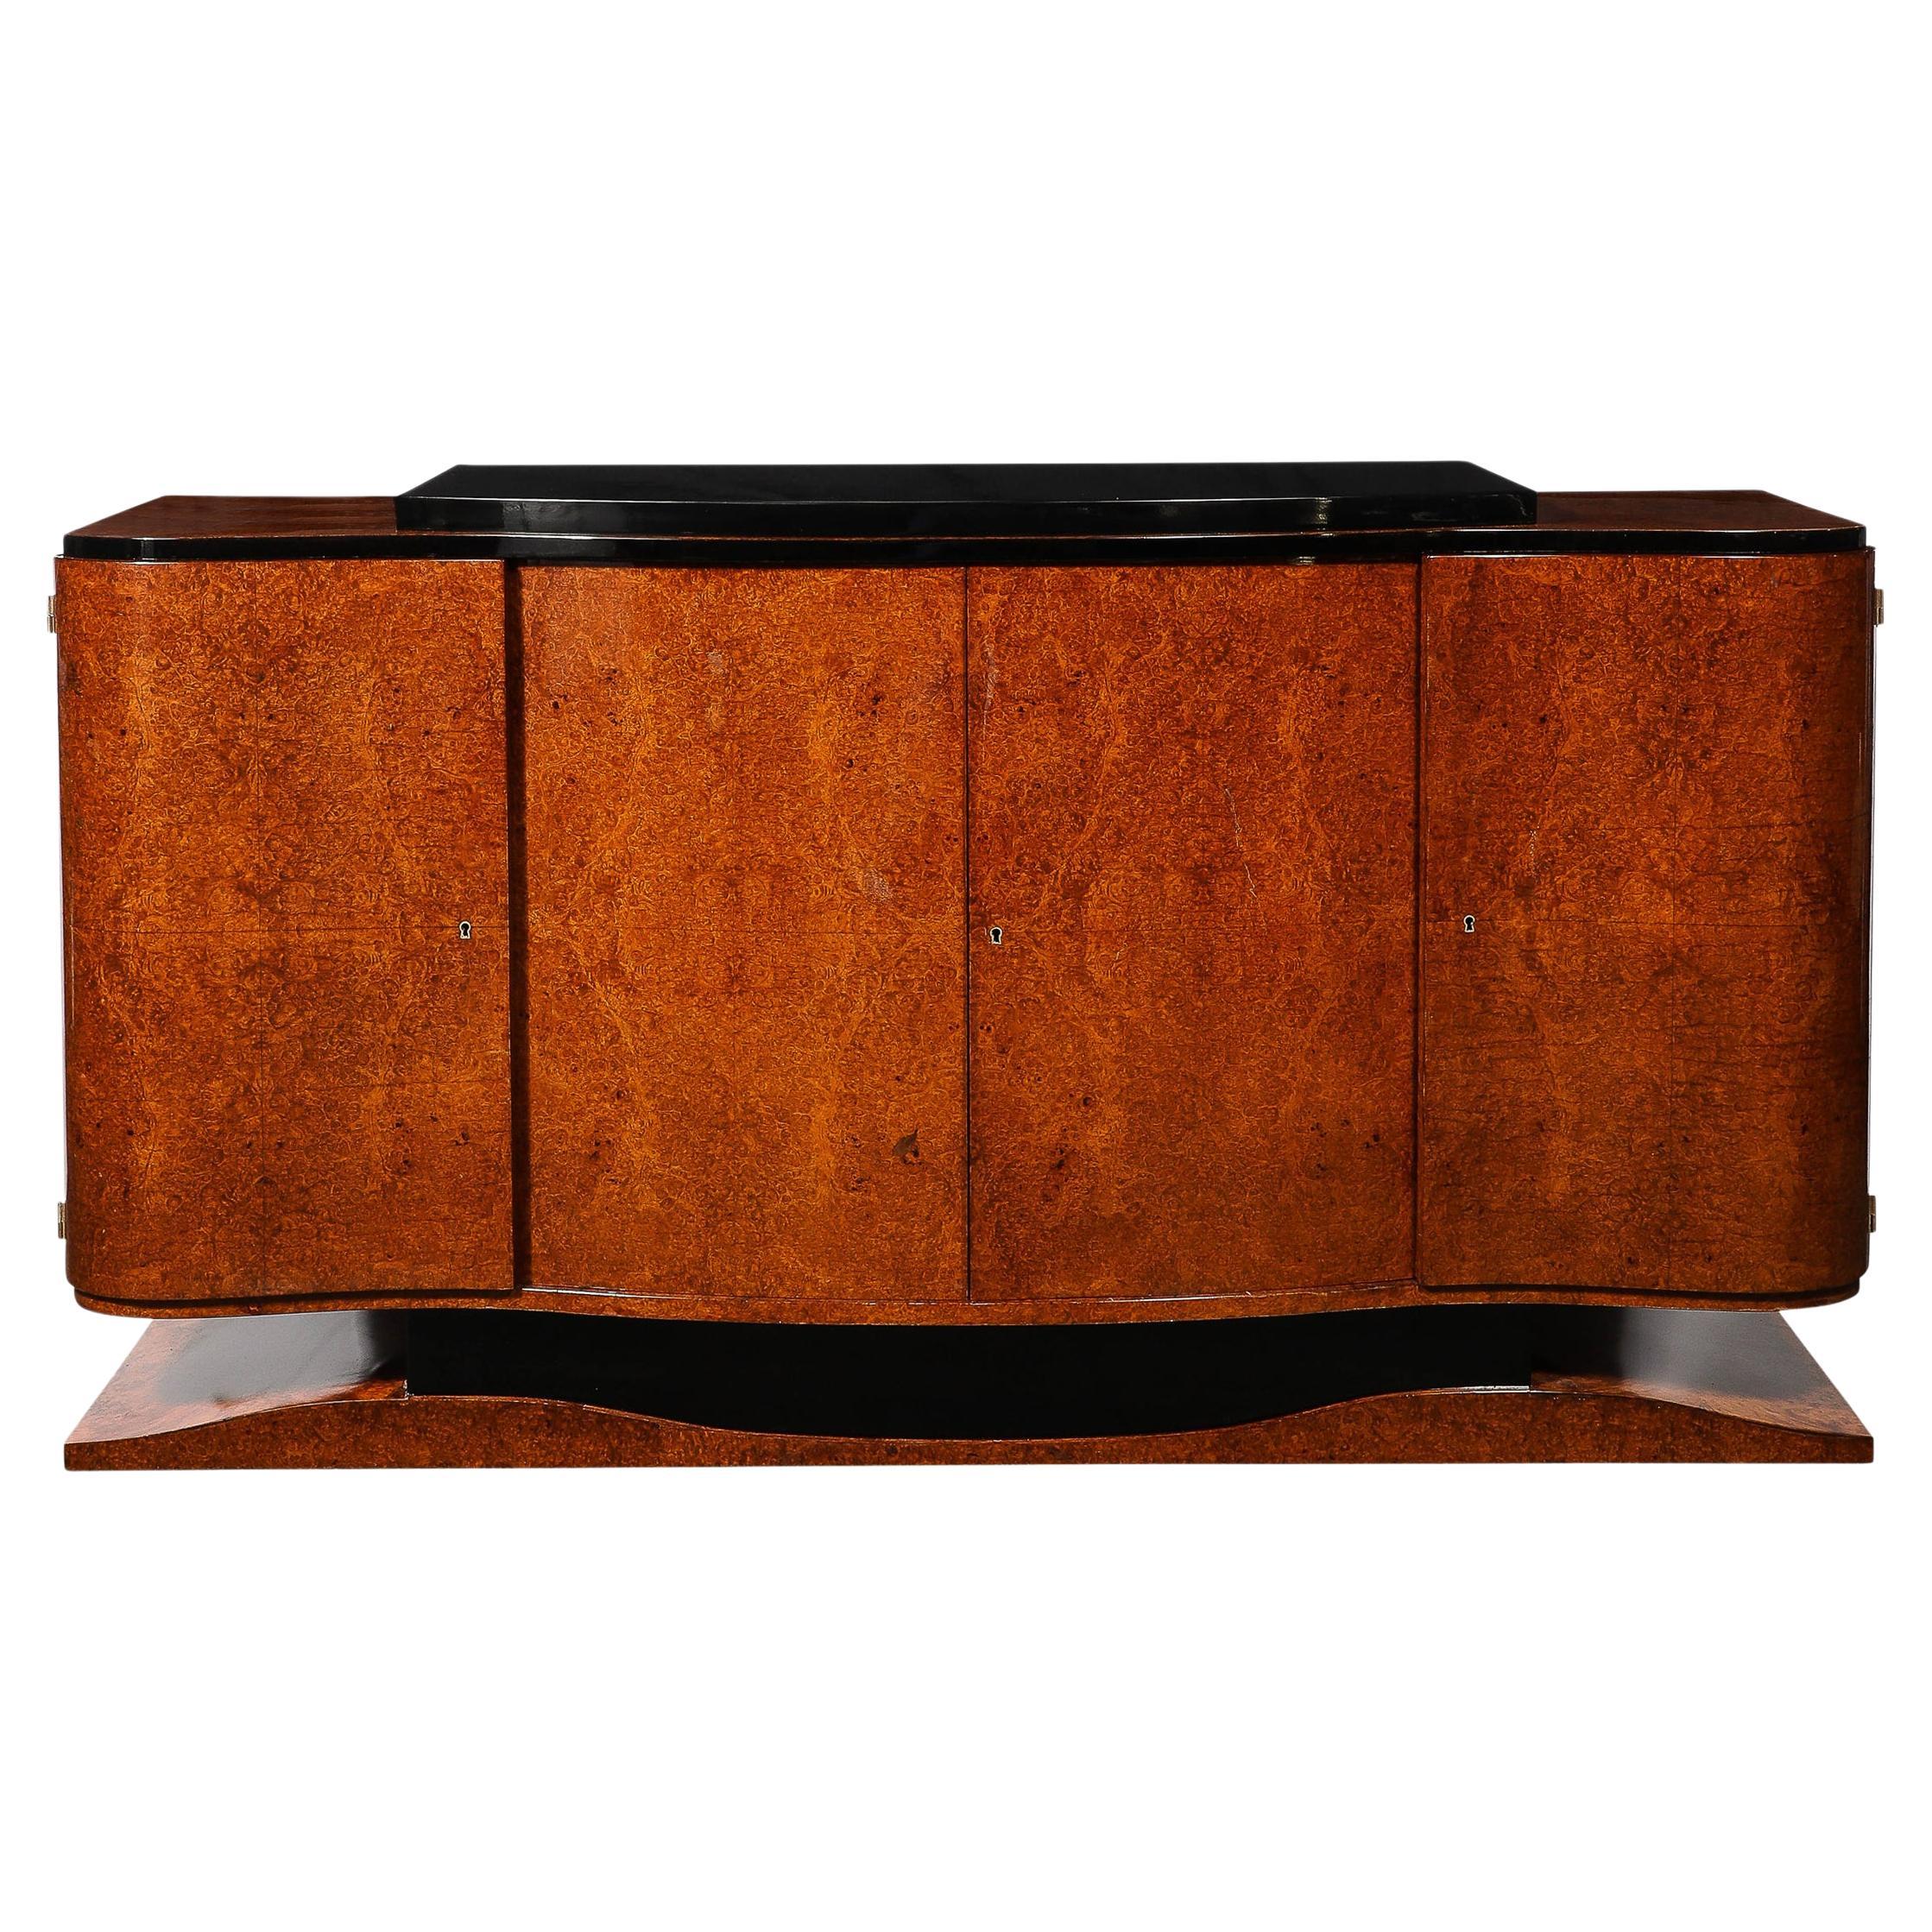 Art Deco Sideboard in Burled & Bookmatched Amboyna Wood w/ Black Lacquer Detail For Sale